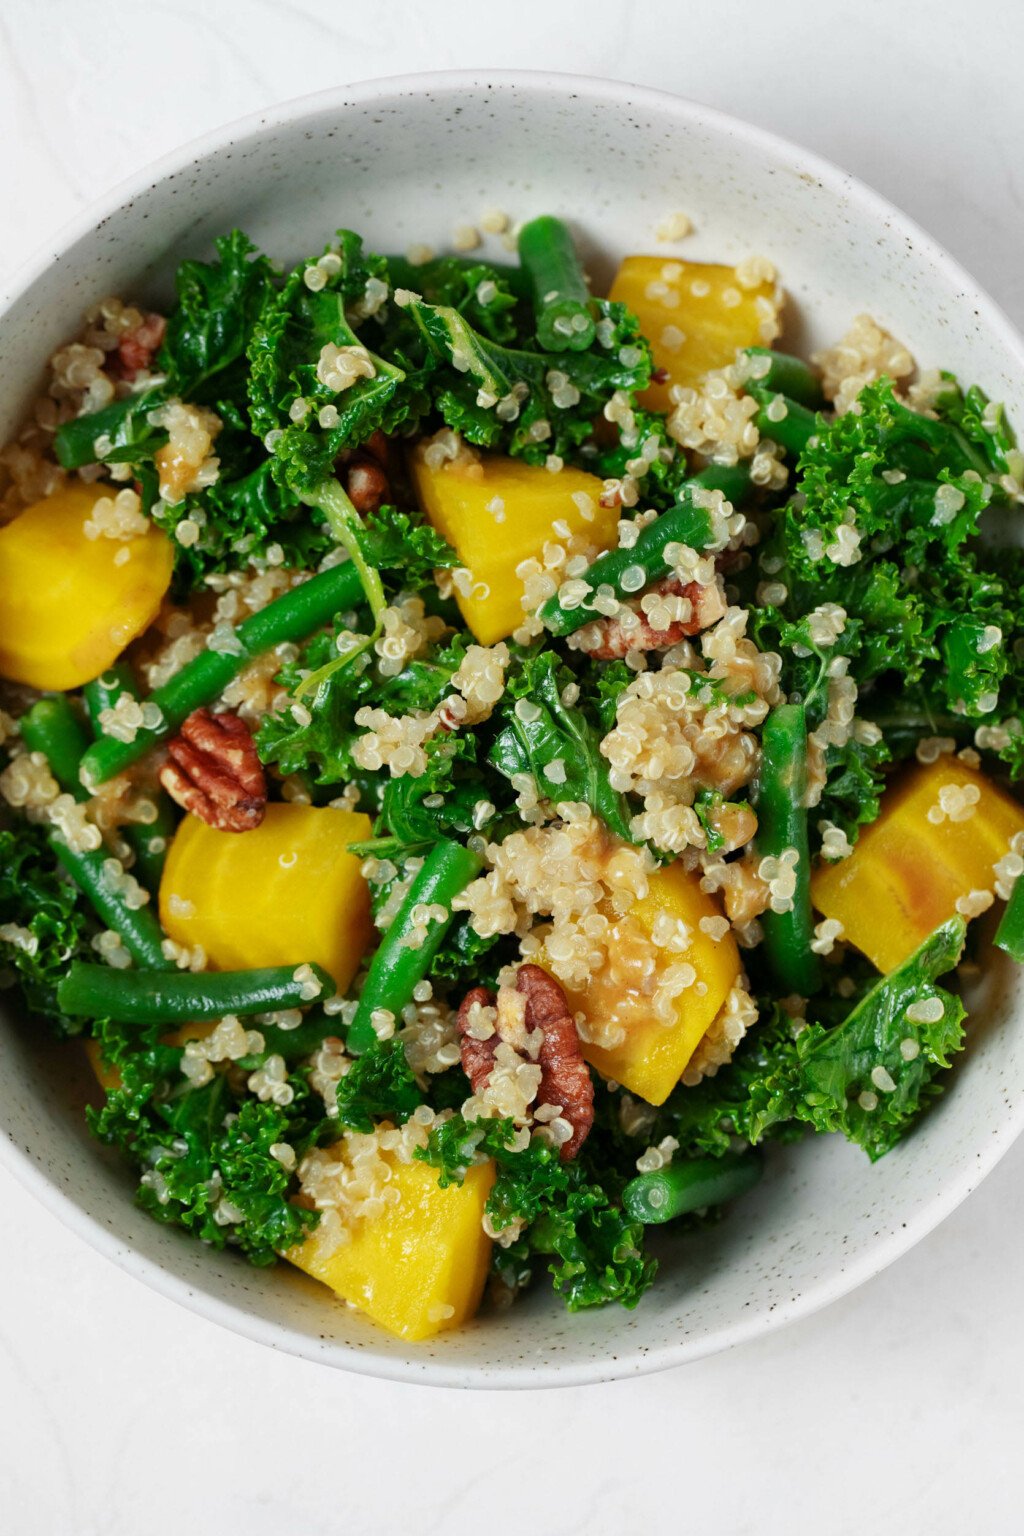 An overhead image of a white bowl, which is filled with a vibrantly-colored kale, golden beet, green bean, and quinoa salad. There are brown pieces of toasted pecan throughout.